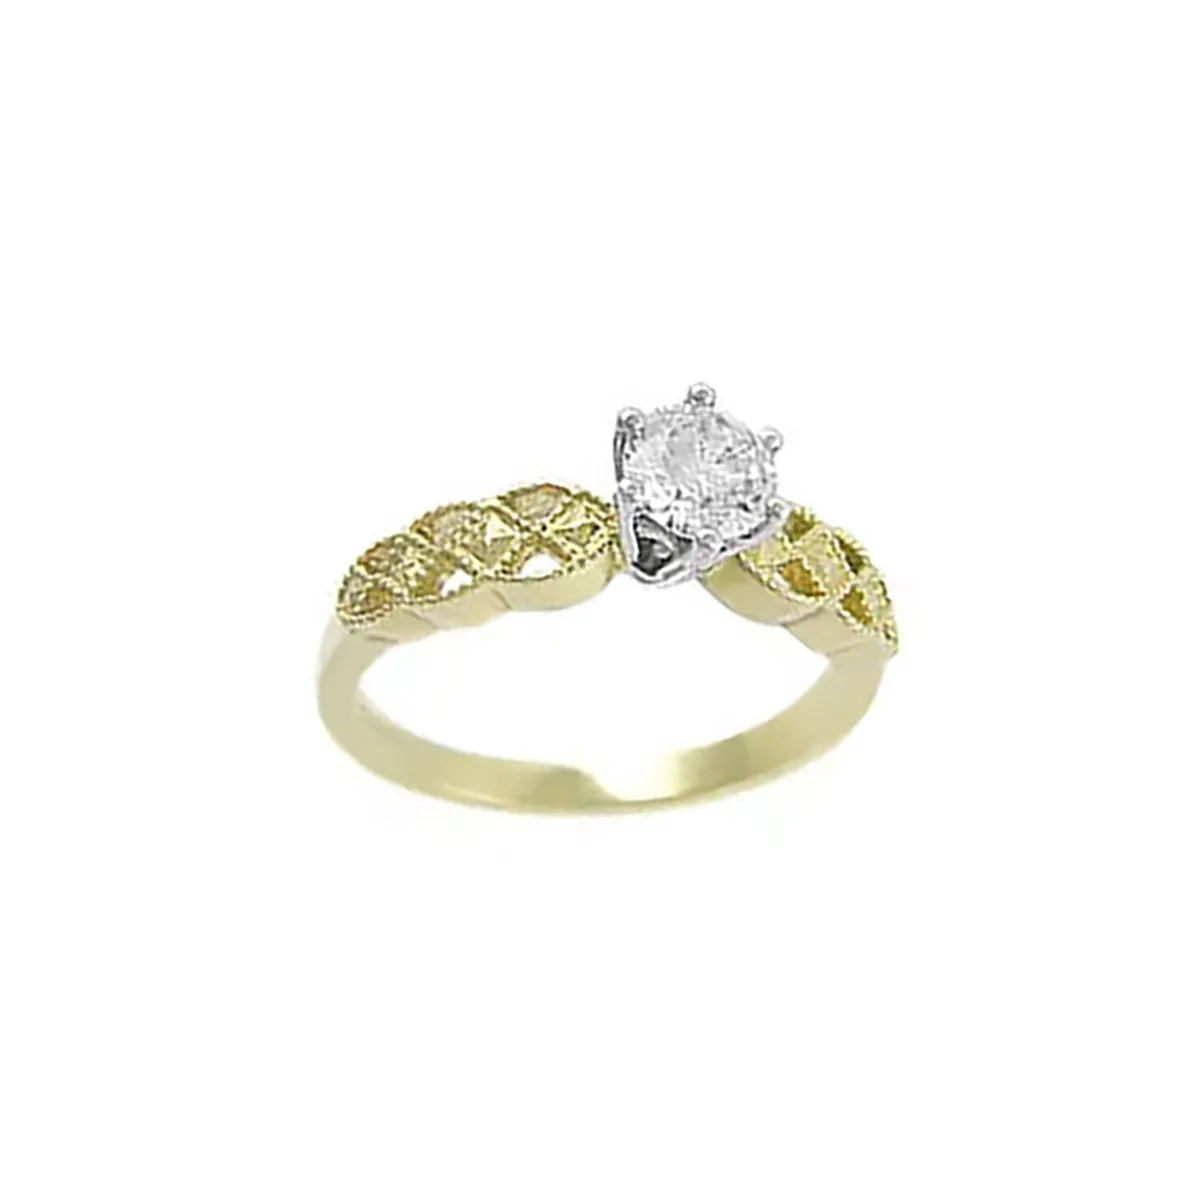 Celtic Solitaire Ring Crafted In 14k Yellow Gold, Set With A Single St...